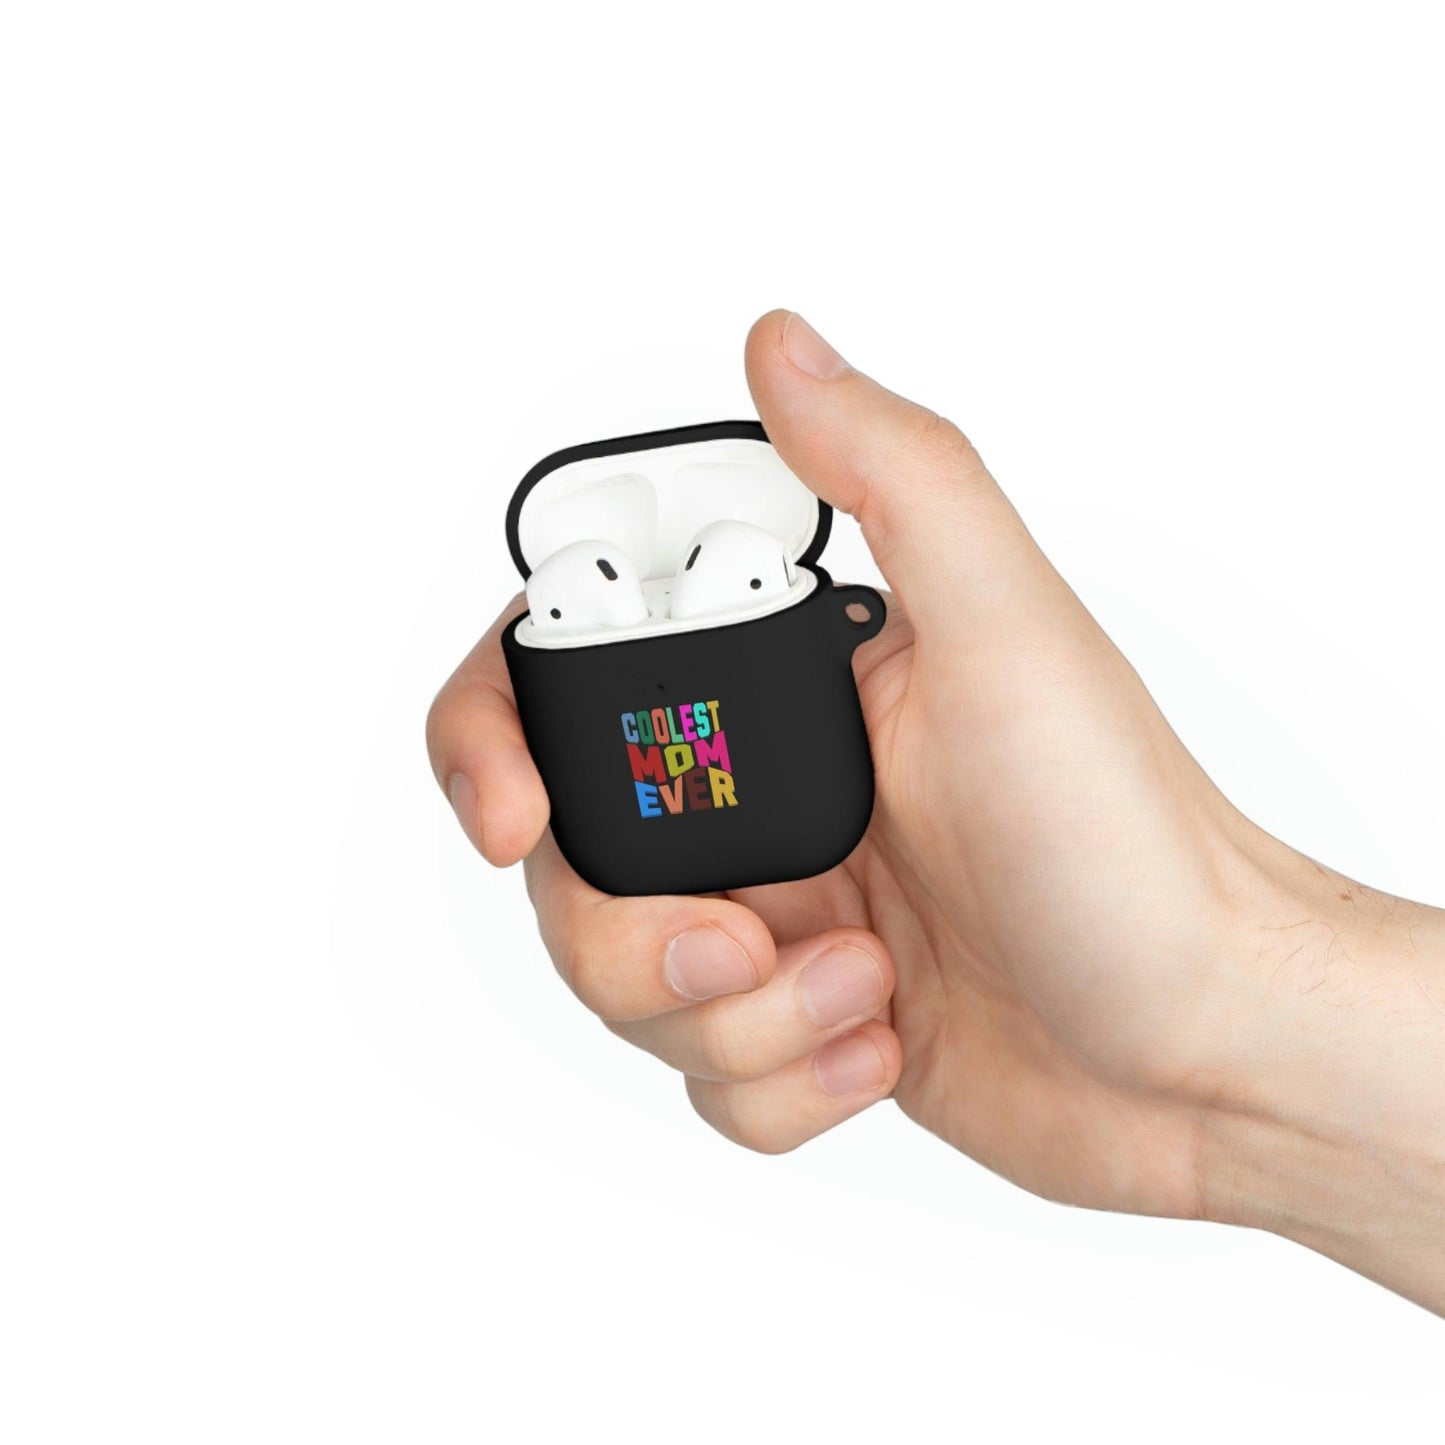 AirPods and AirPods Pro Case Cover - Giftsmojo